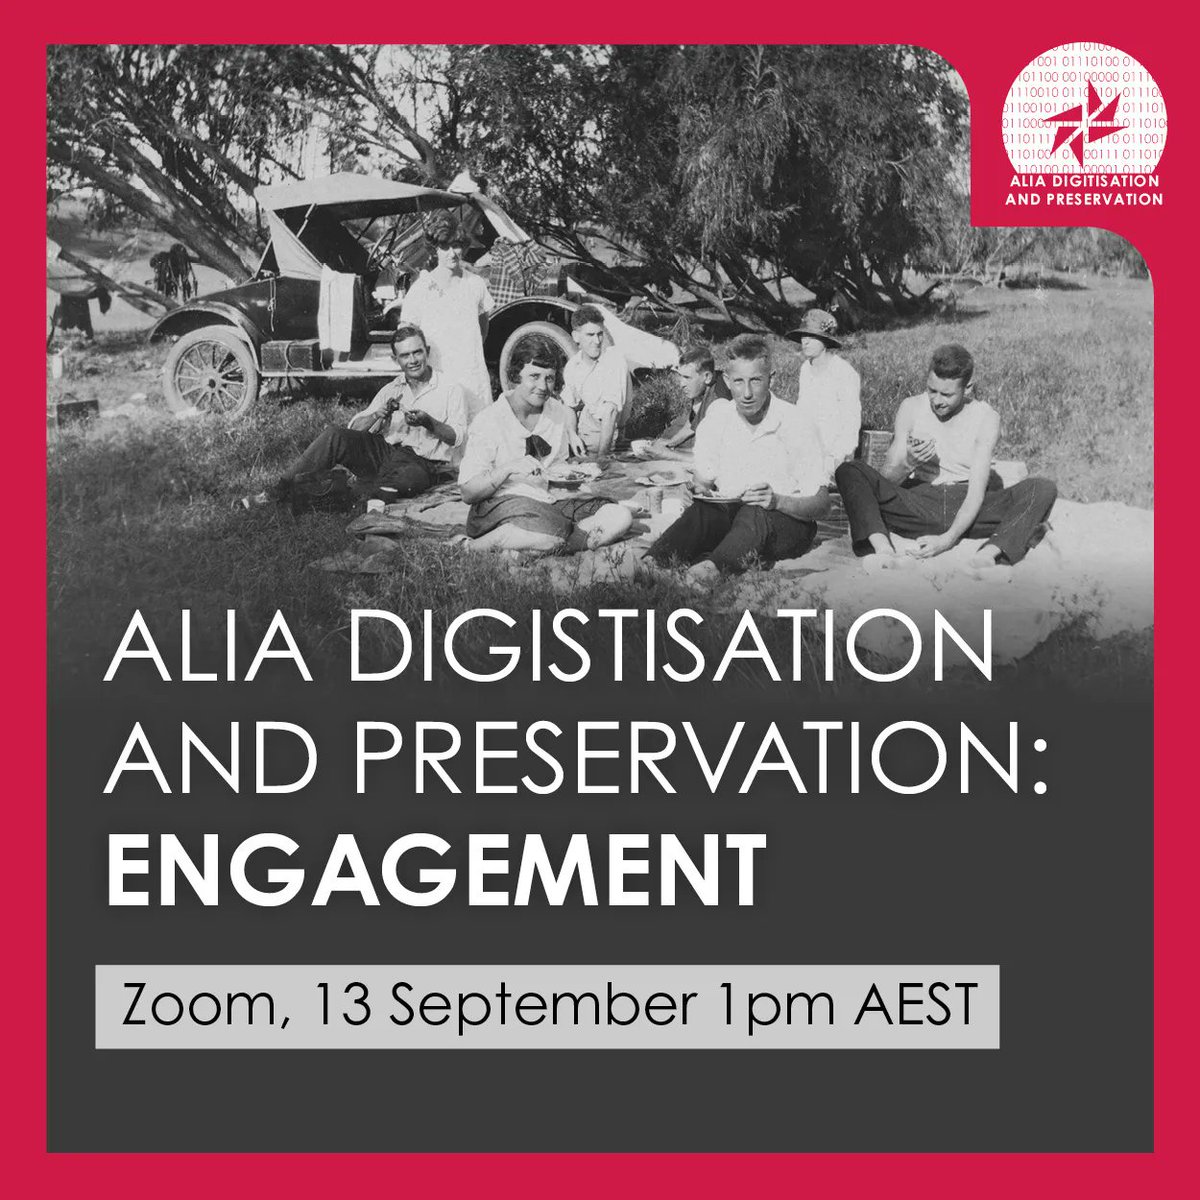 Join speakers from Trove, Wikimedia, and the Biodiversity Heritage Library in a discussion about ways to increase engagement with digitised collections. This is a free webinar presented by the ALIA Digitisation and Preservation group, register now: buff.ly/45En8tk